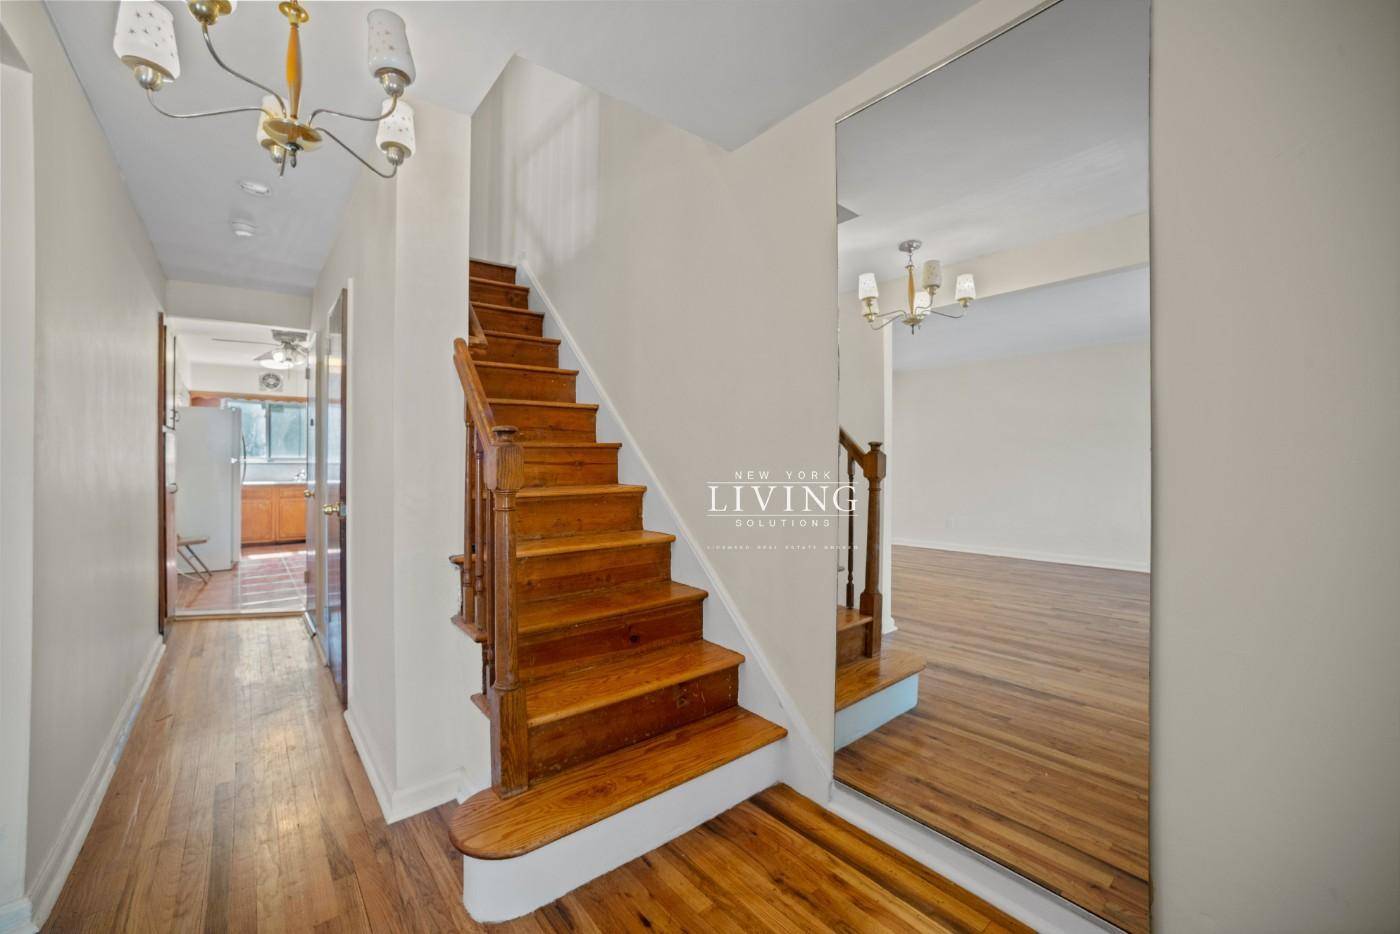 BY APPOINTMENT ONLYLocated in a very residential tree lined street, in the desired East Flatbush Neighborhood.